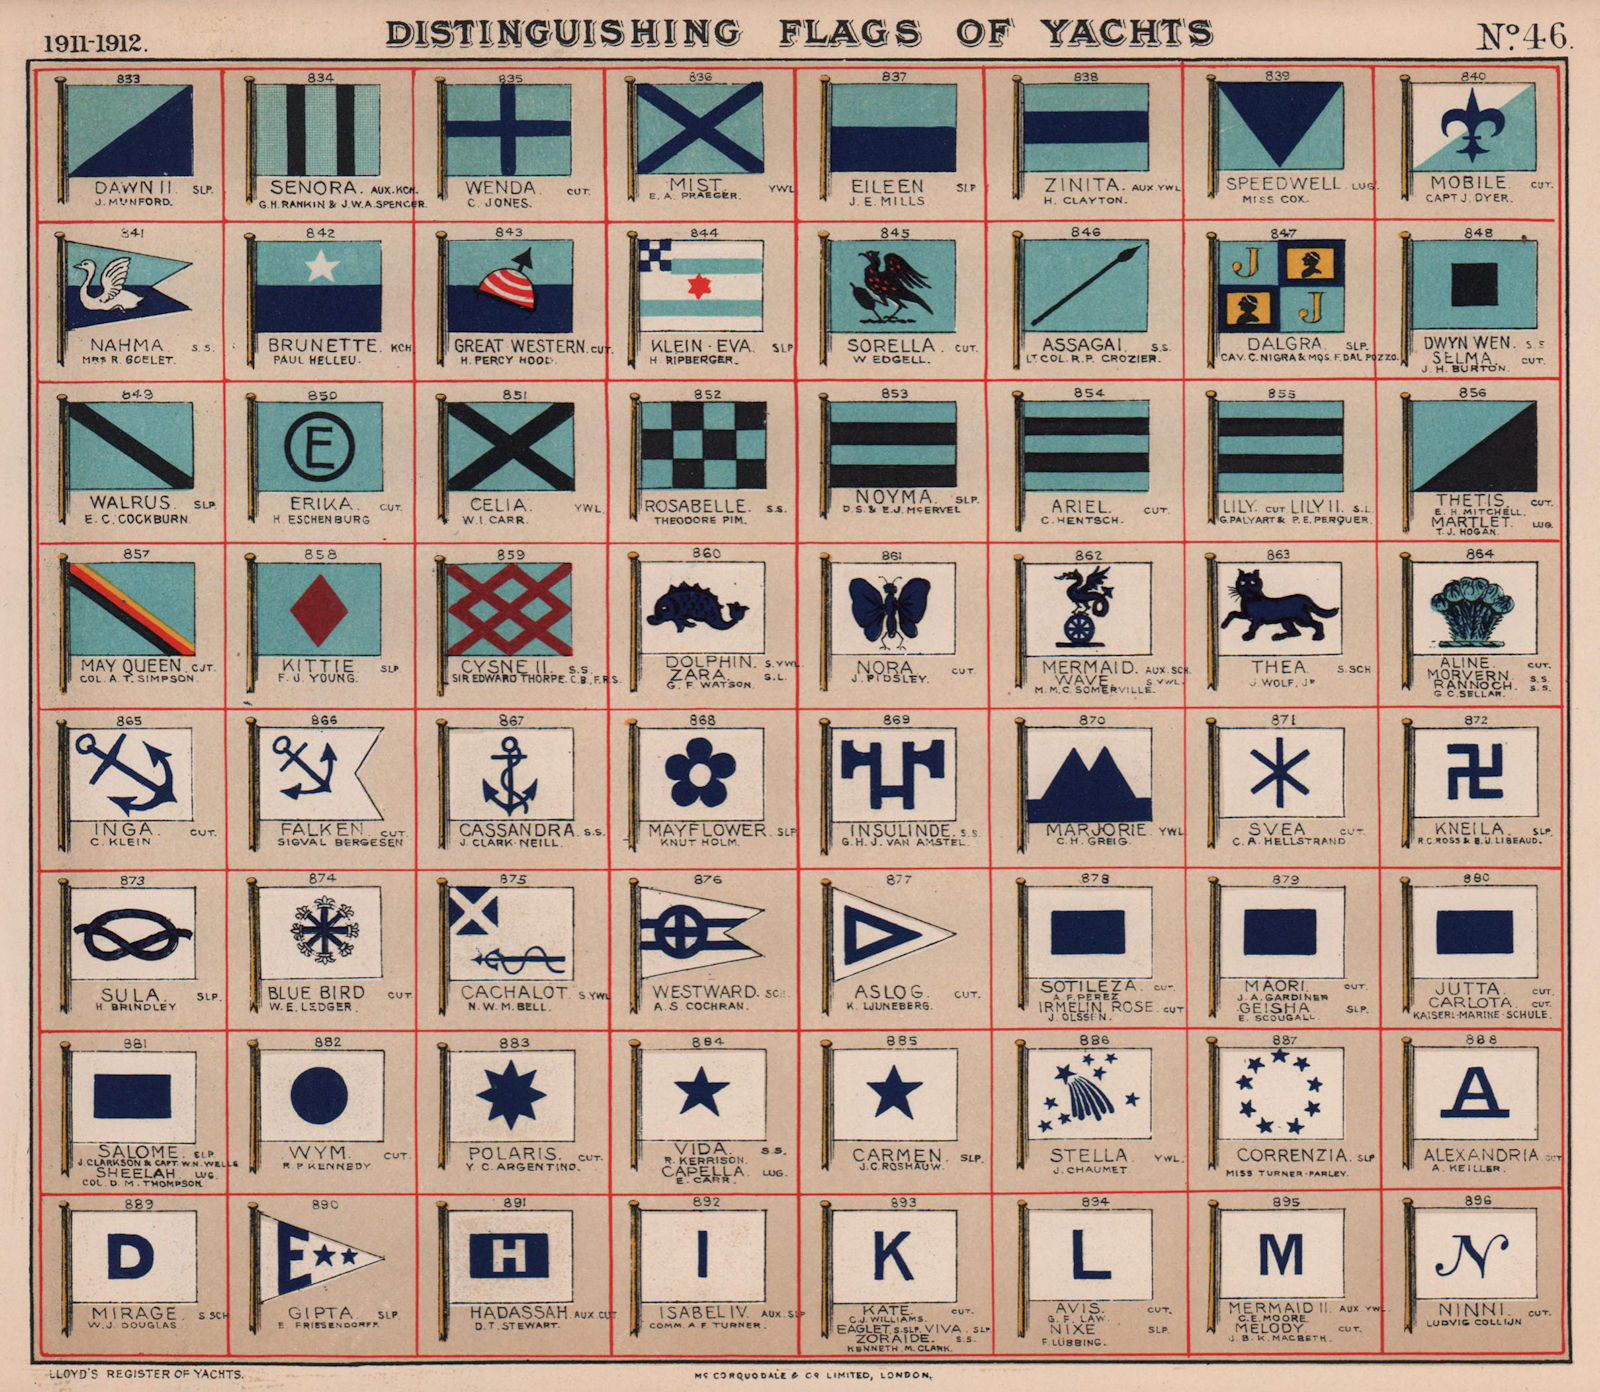 YACHT FLAGS. Turquoise & Black, Blue & Red. Blue & White 1911 old print